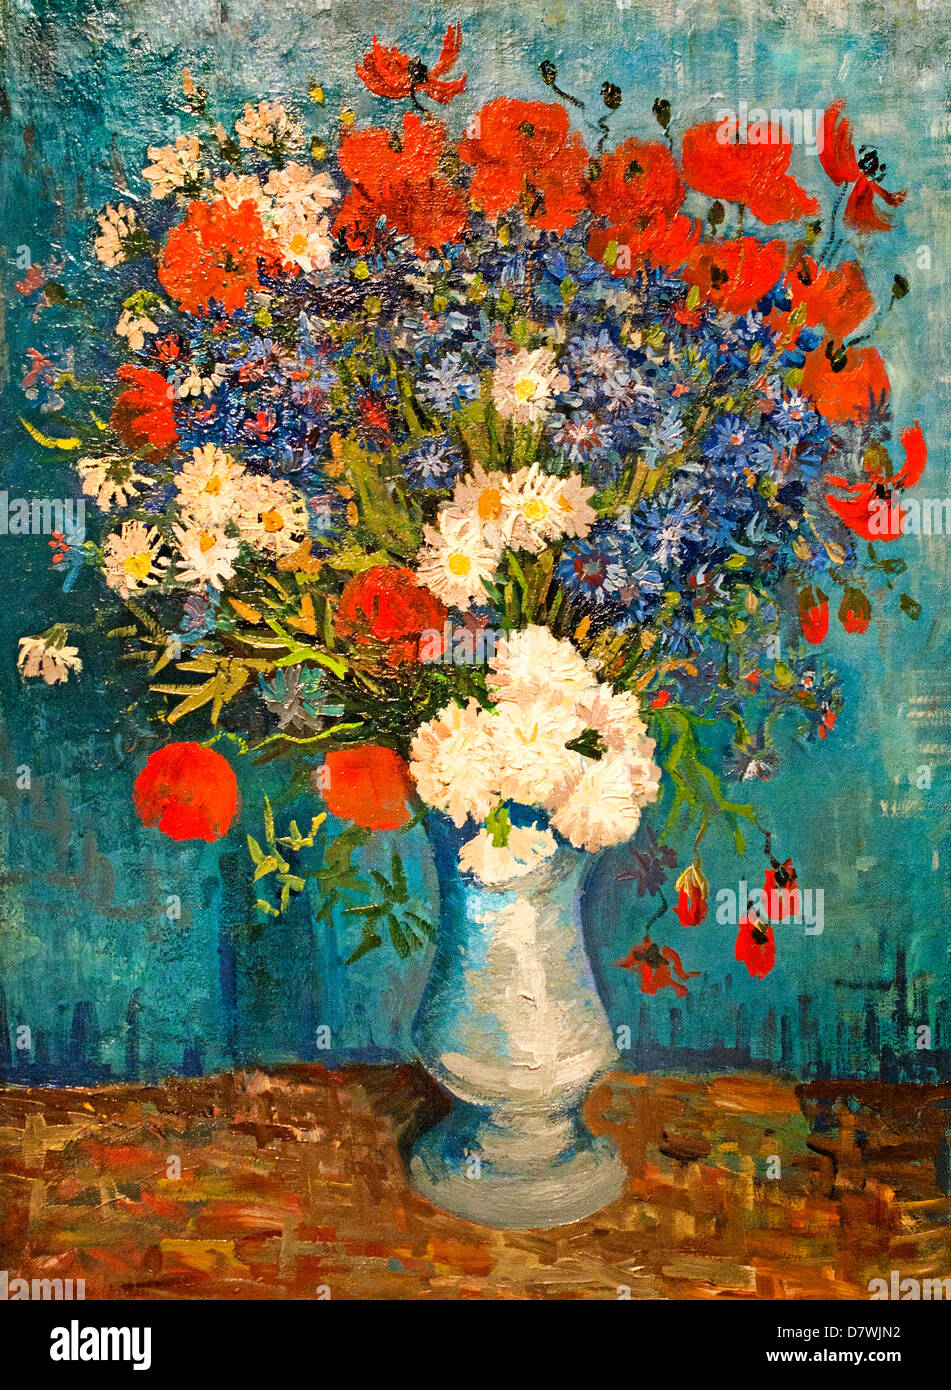 Vase with cornflowers and poppies 1886 Vincent van Gogh 1853 - 1890  Dutch Netherlands Post Impressionism Stock Photo